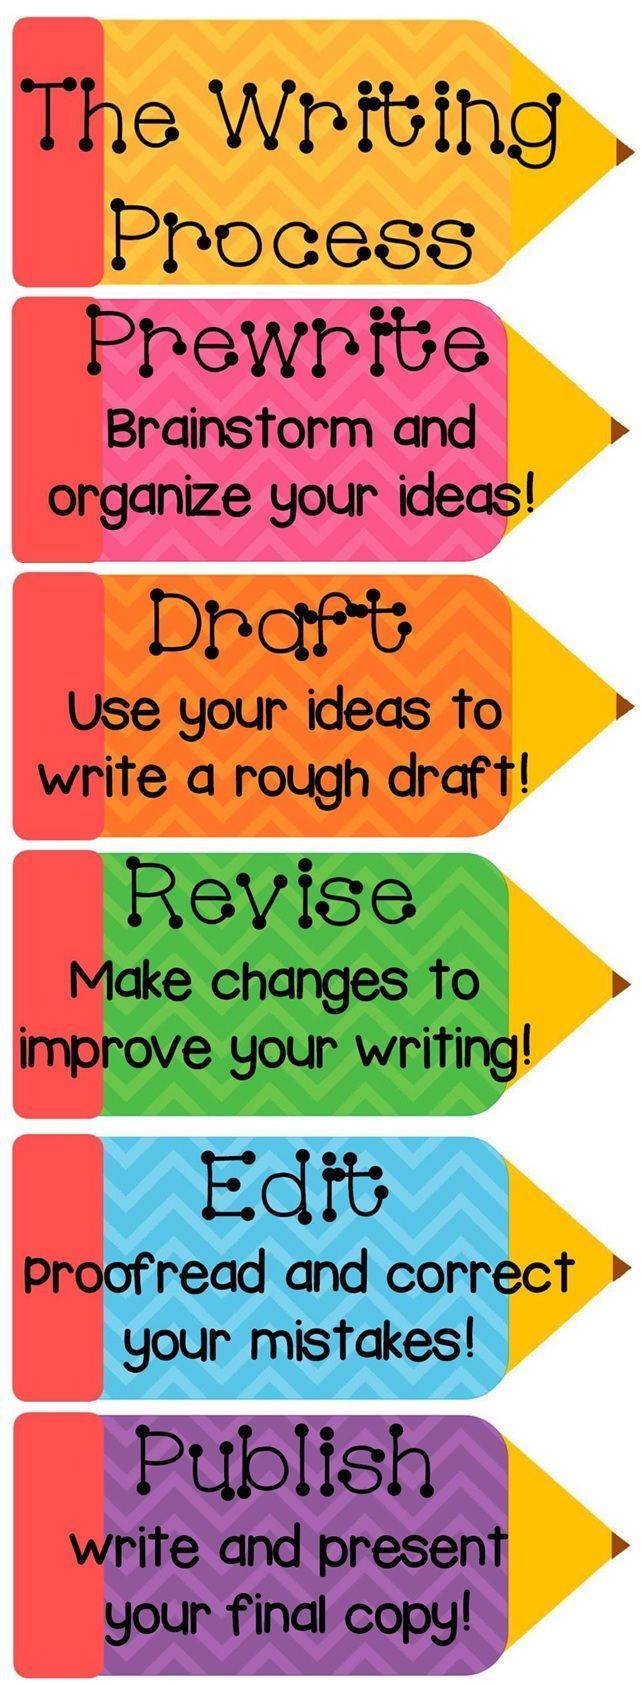 We will use The Writing Process for DPA projects. Pick a topic and begin an outline using a graphic organizer. Write the first draft.